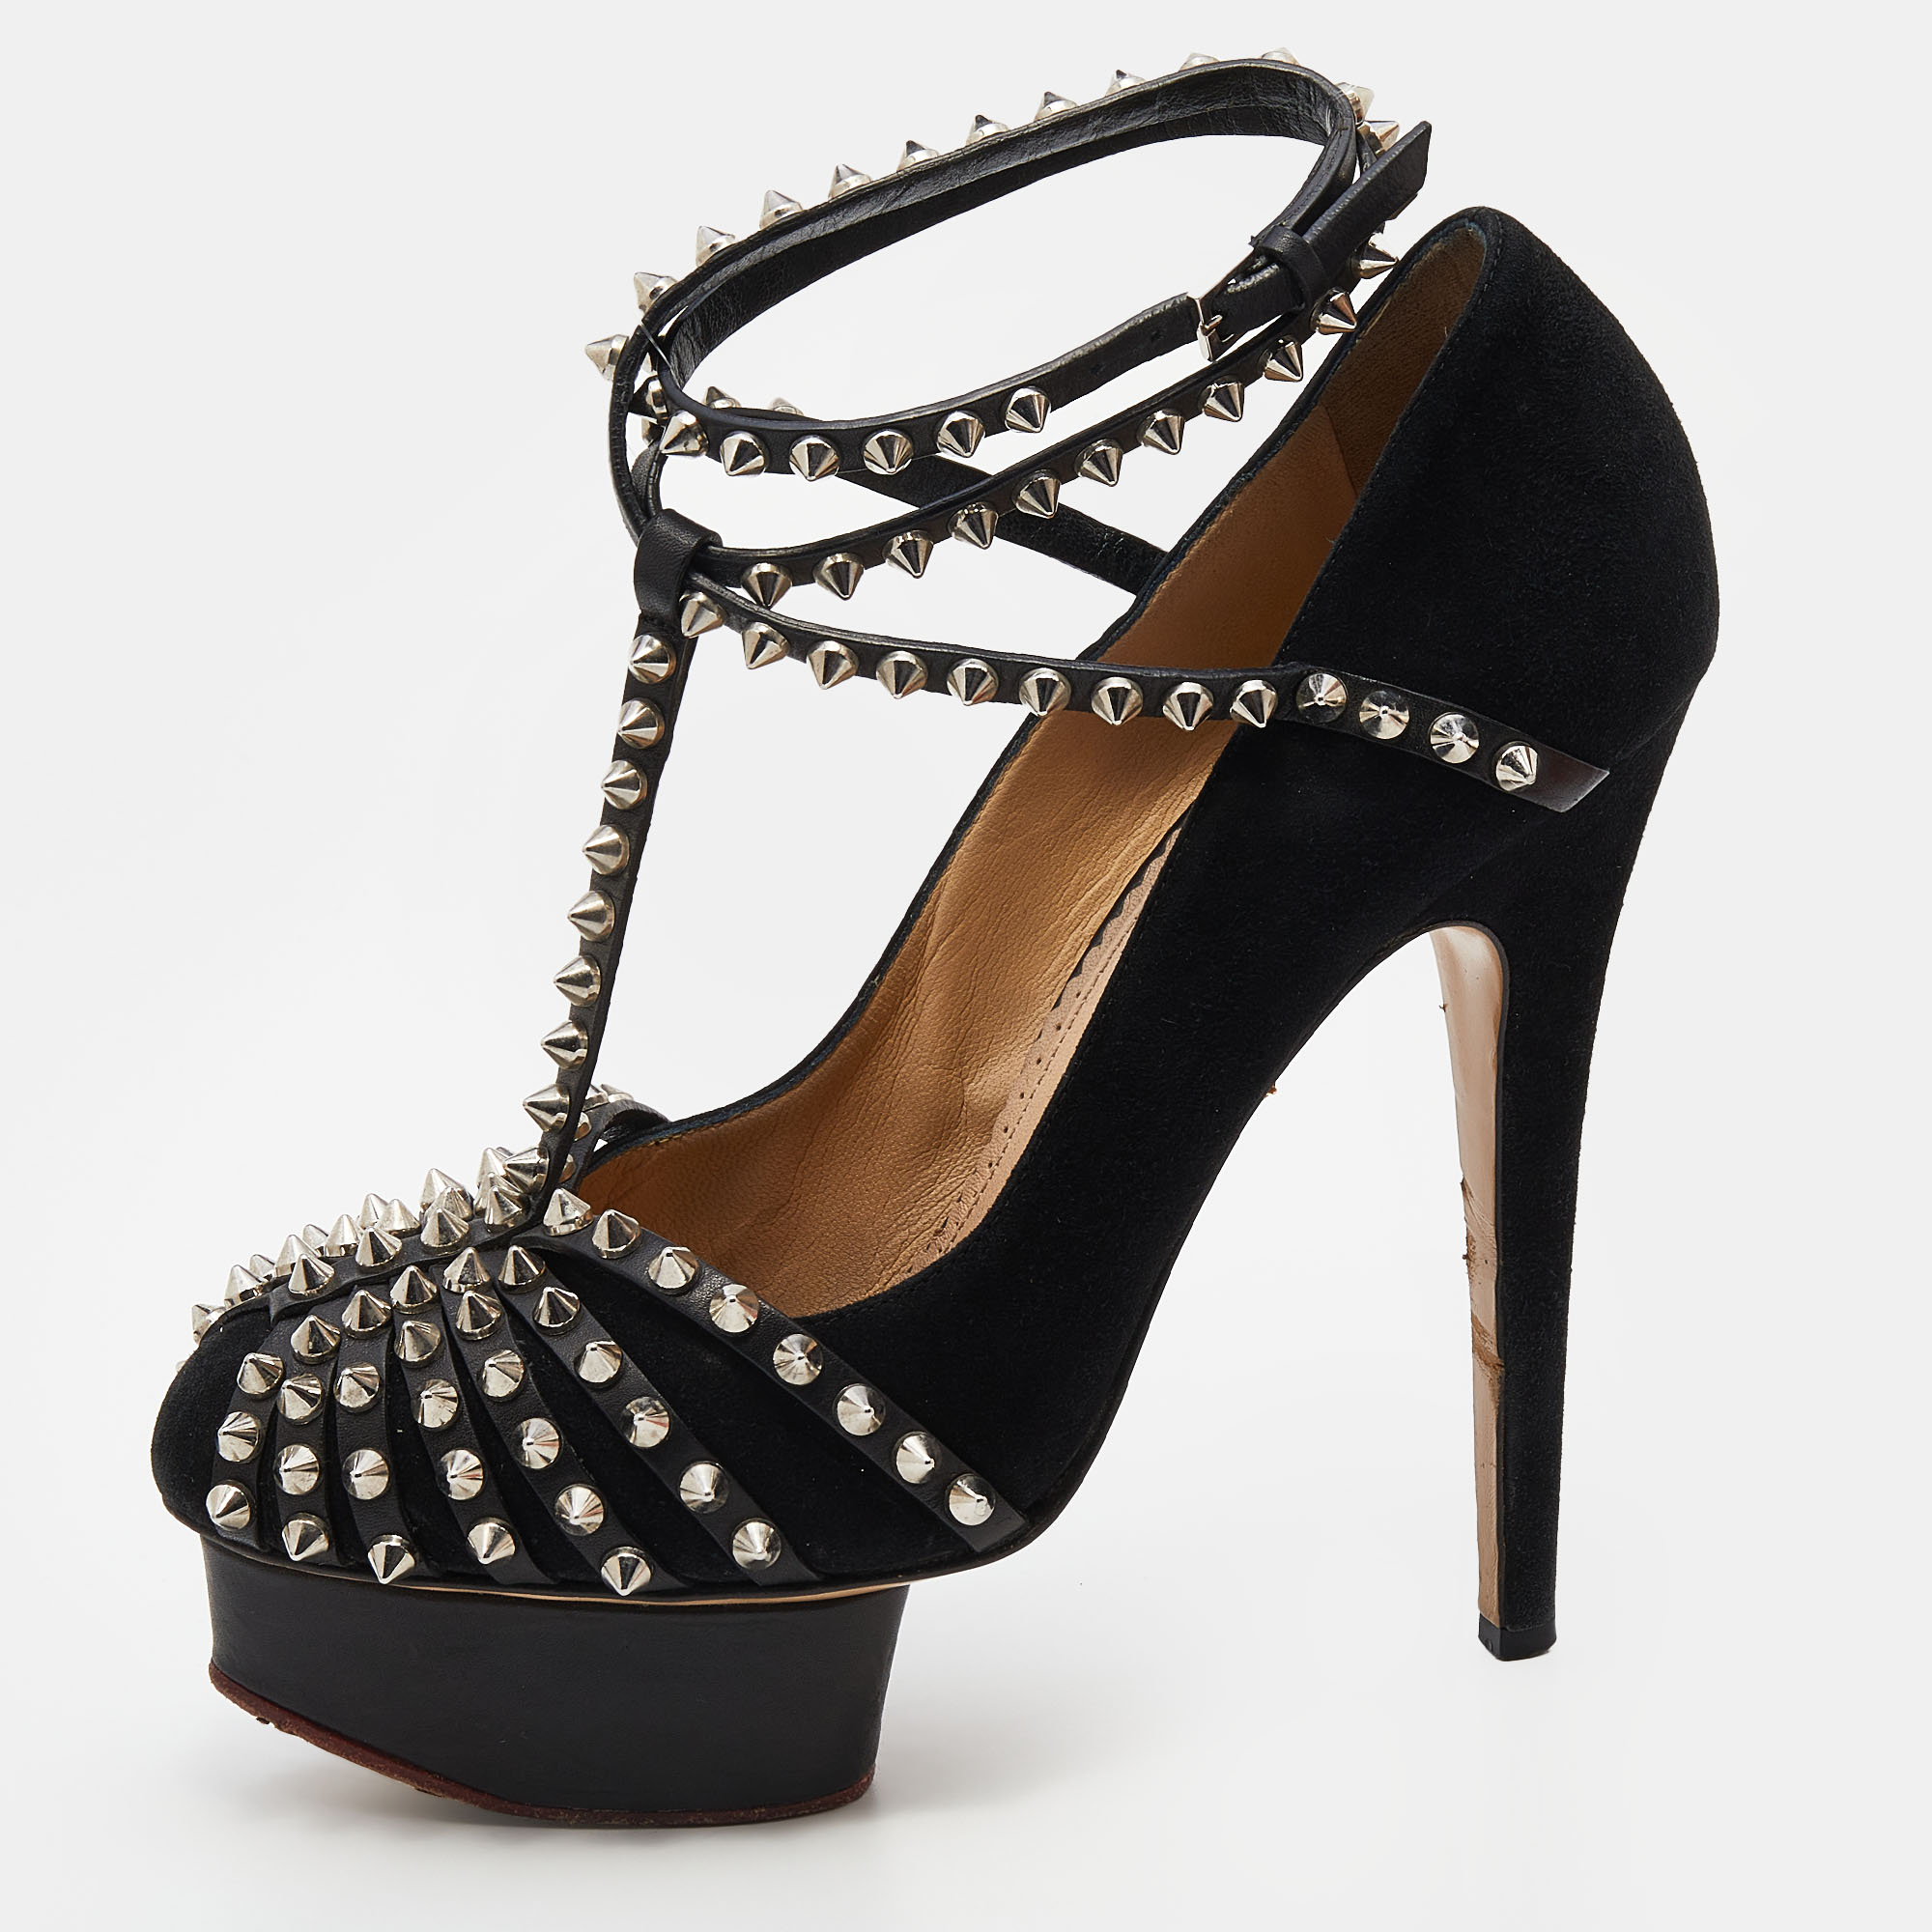 

Charlotte Olympia Black Suede Studded Strappy Ankle Strap Platform Sandals Size 38